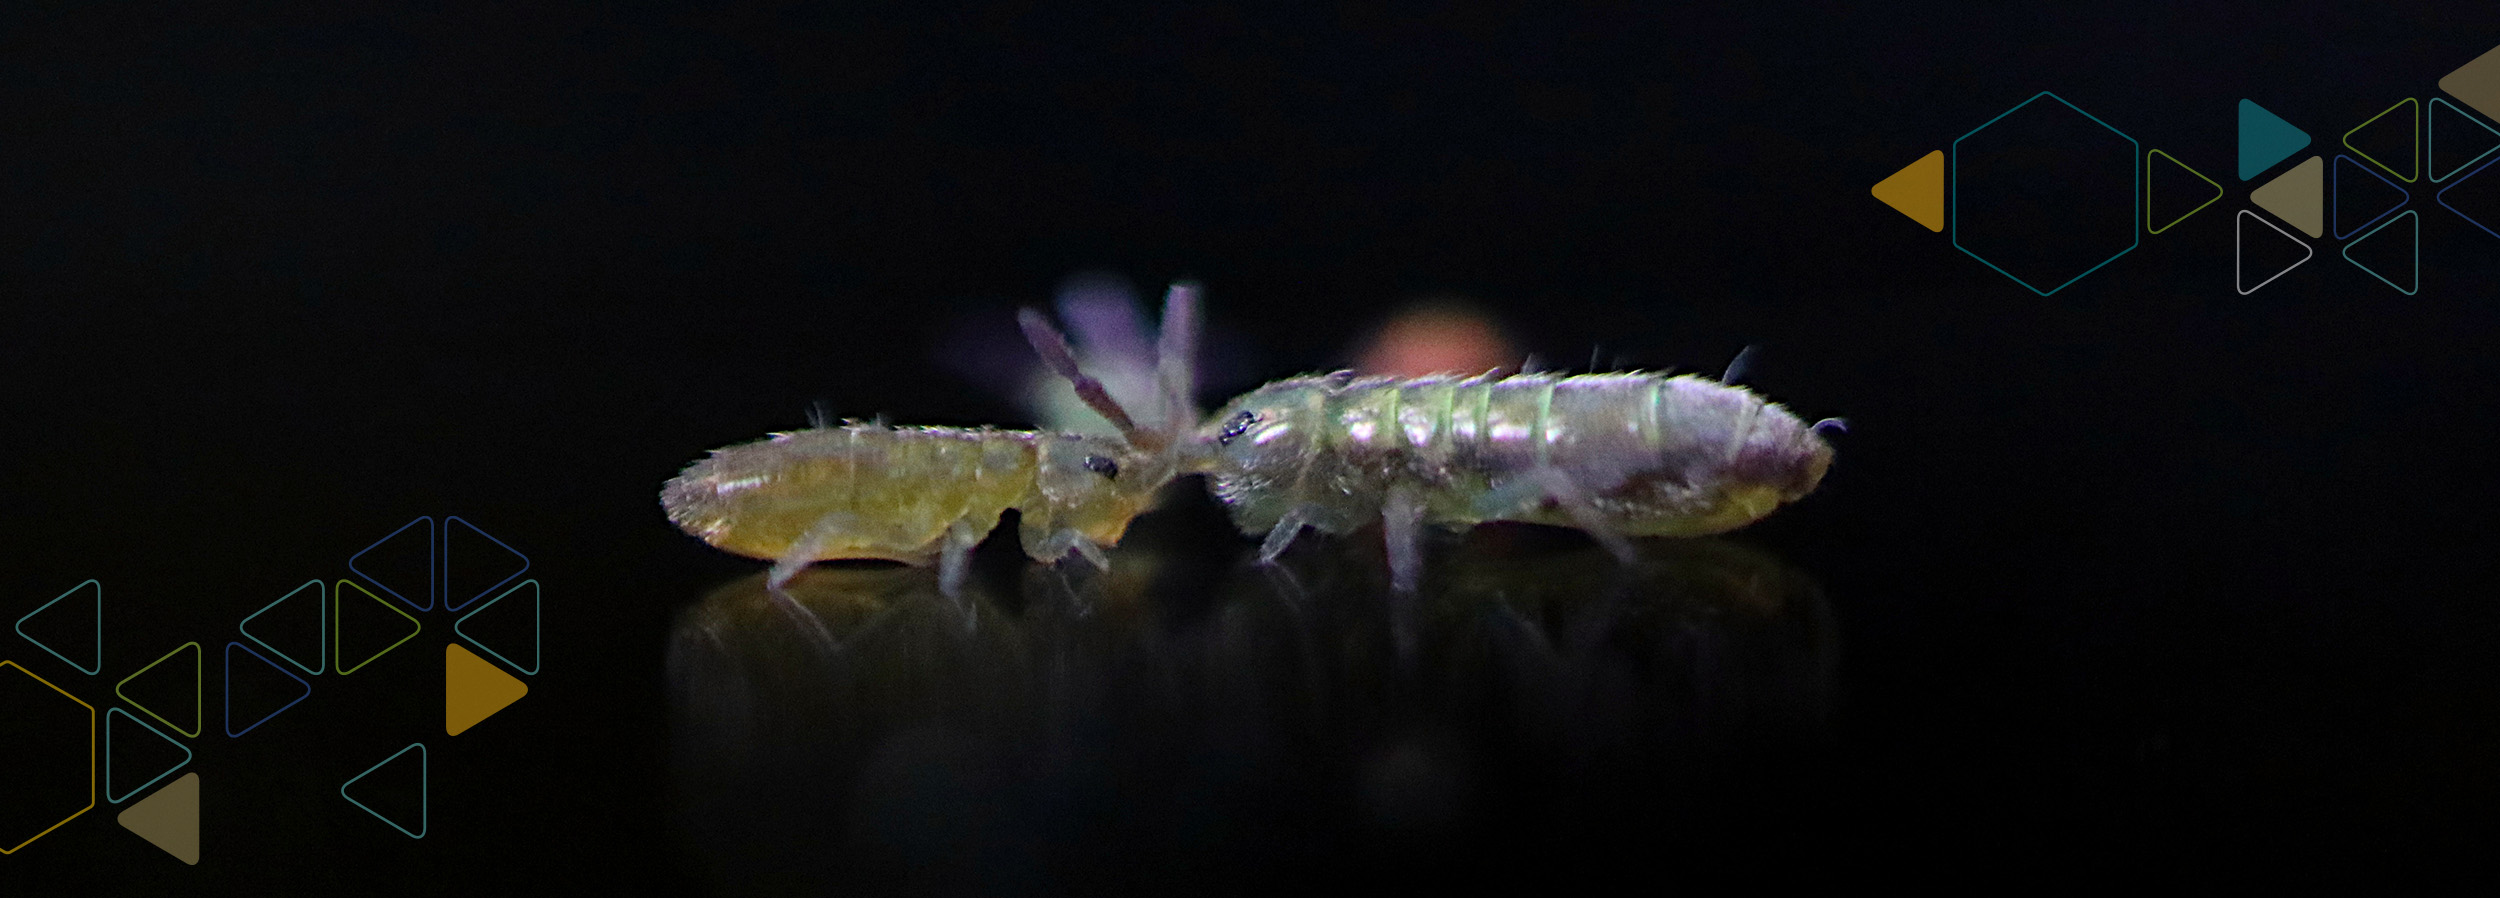 A closeup image of a springtail, the most abundant non-insect hexapods on earth.